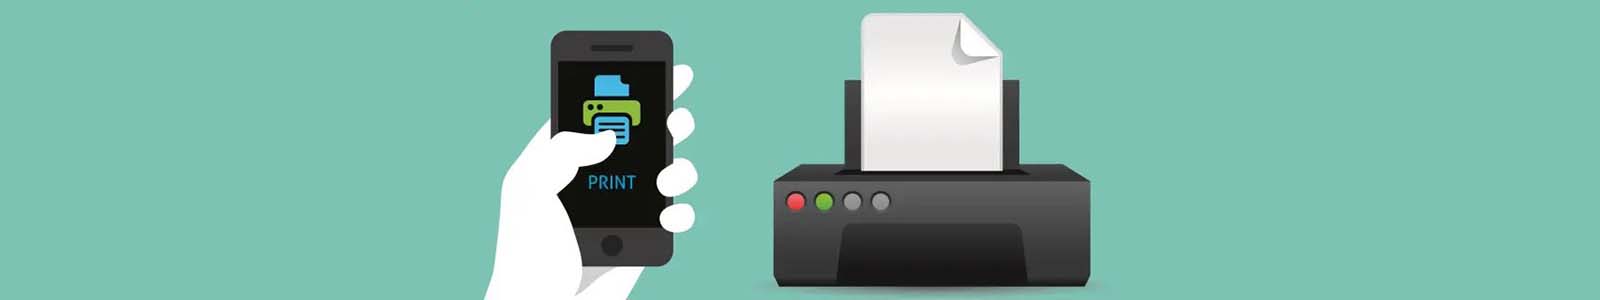 Using a mobile device to print to a multi-function printer